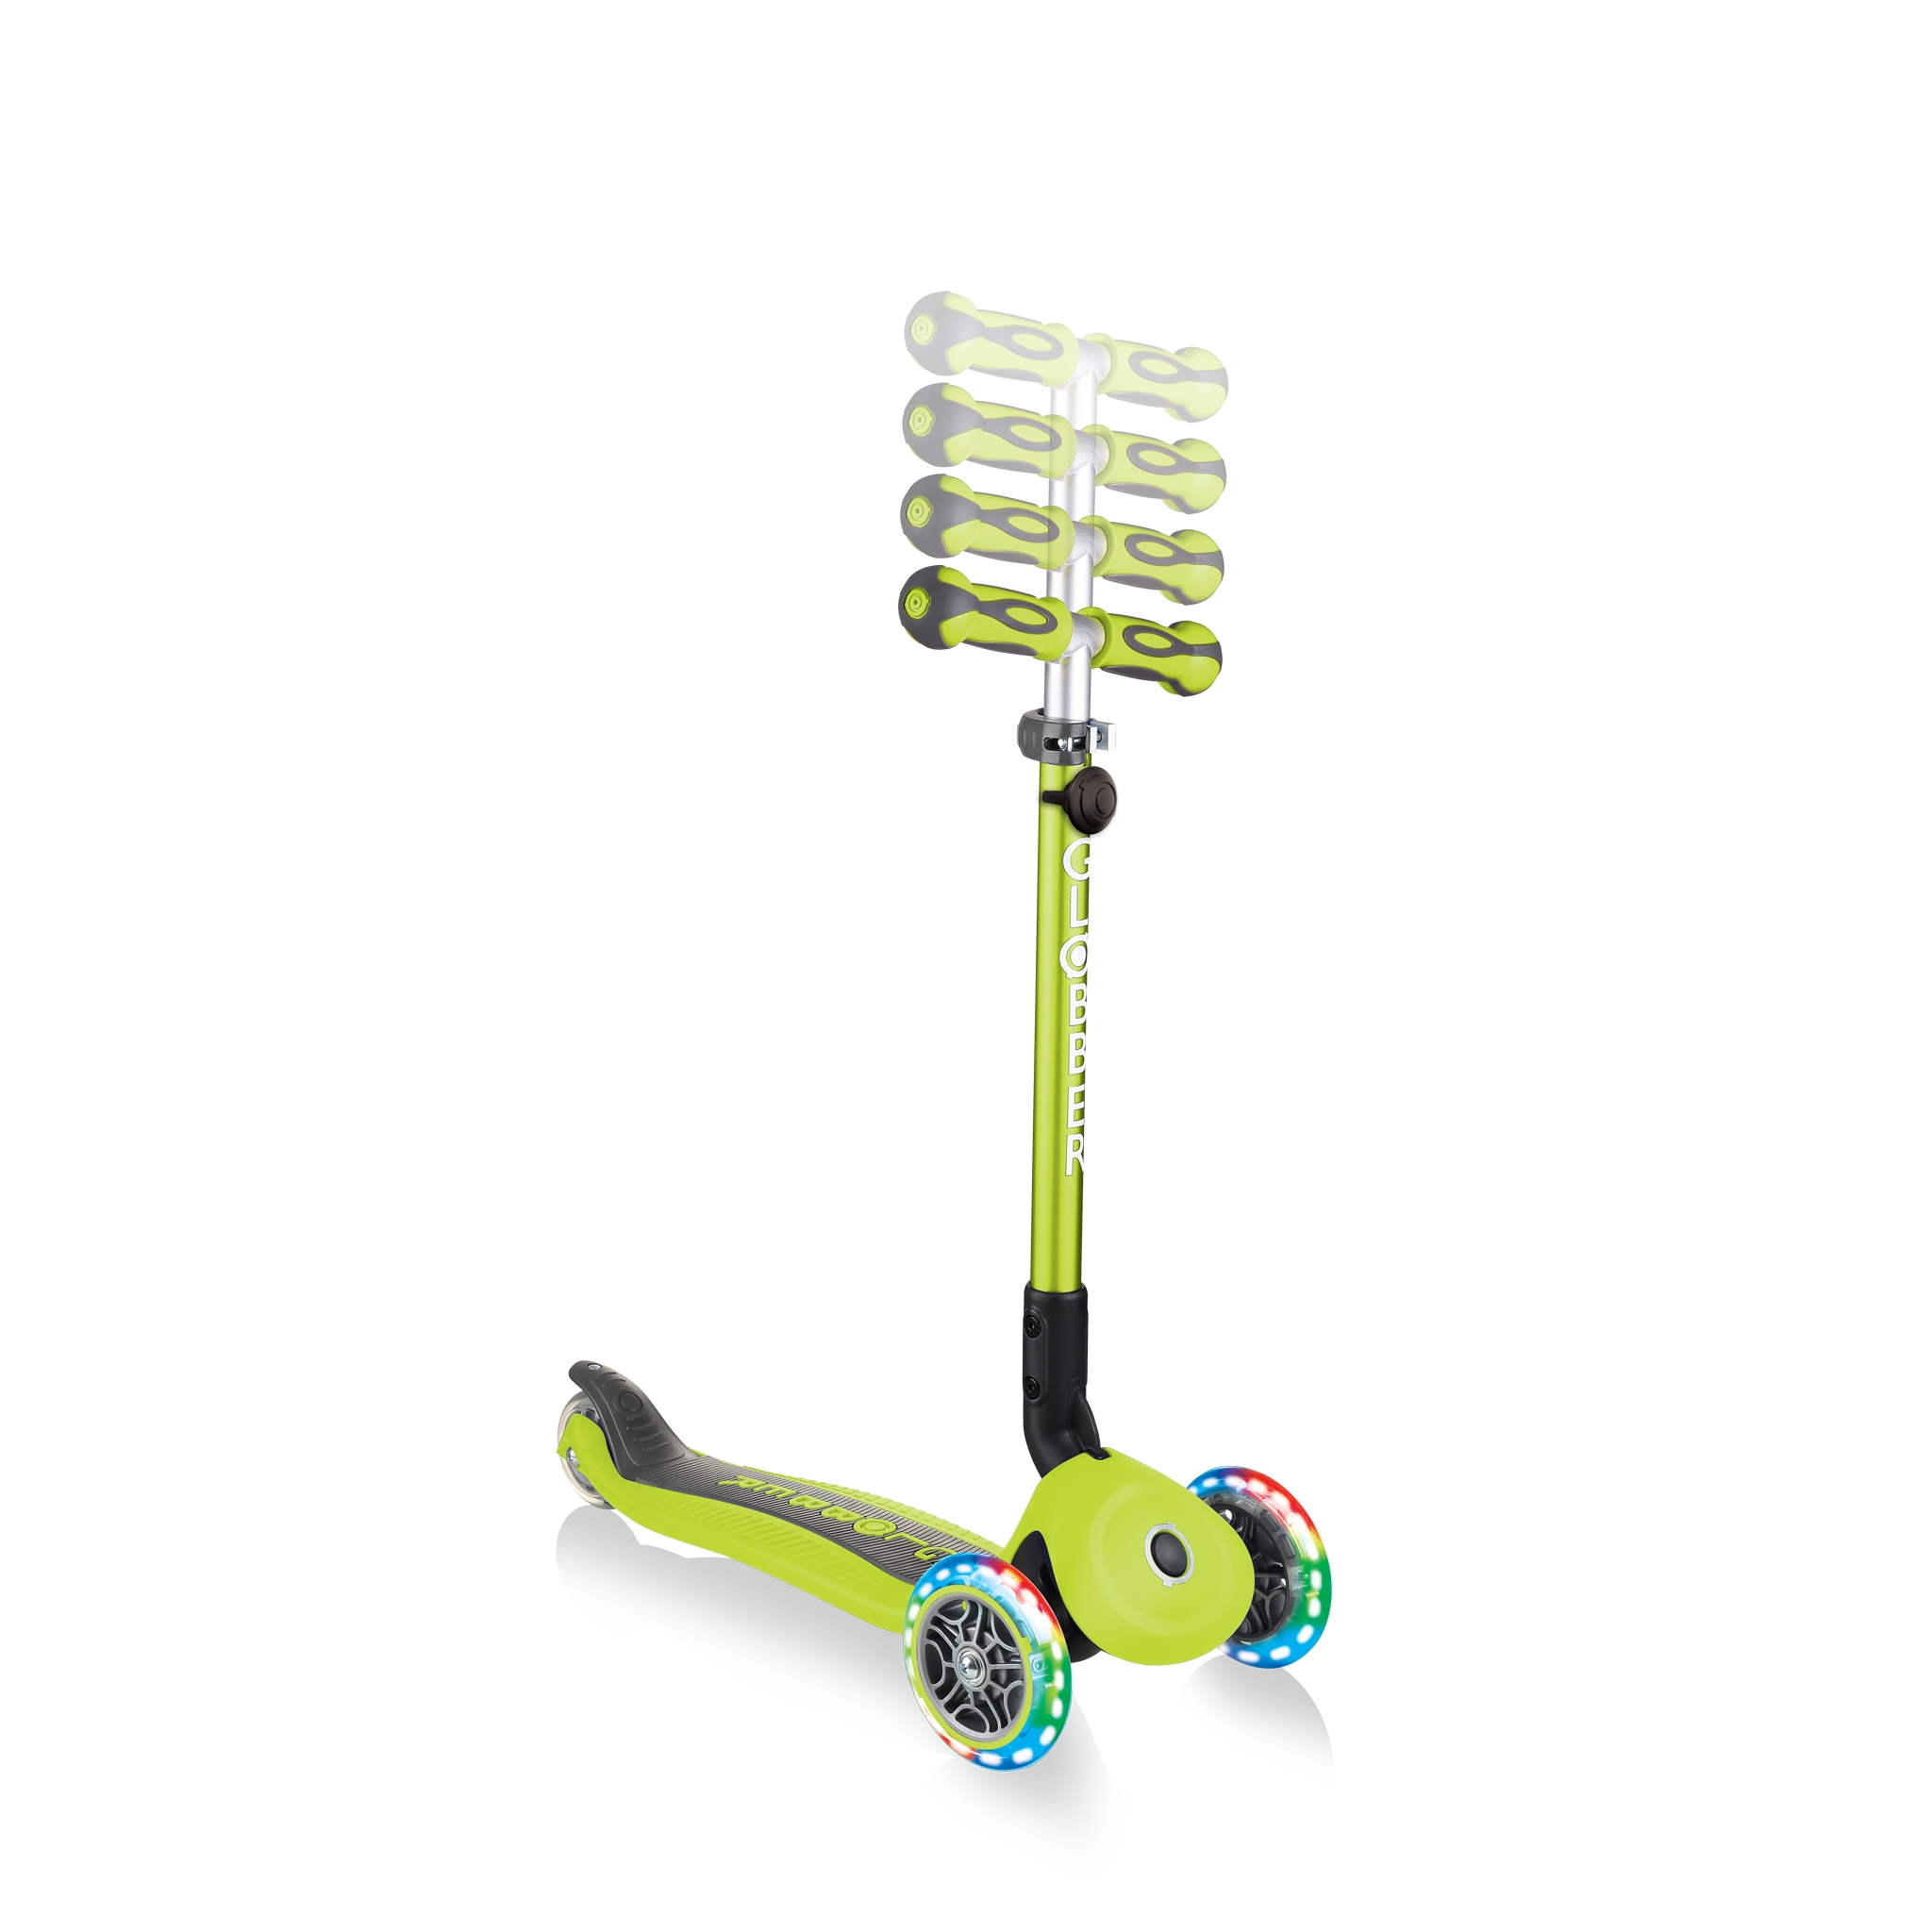 GO-UP-DELUXE-LIGHTS-ride-on-walking-bike-scooter-with-4-height-adjustable-T-bar-and-light-up-wheels-lime-green 4